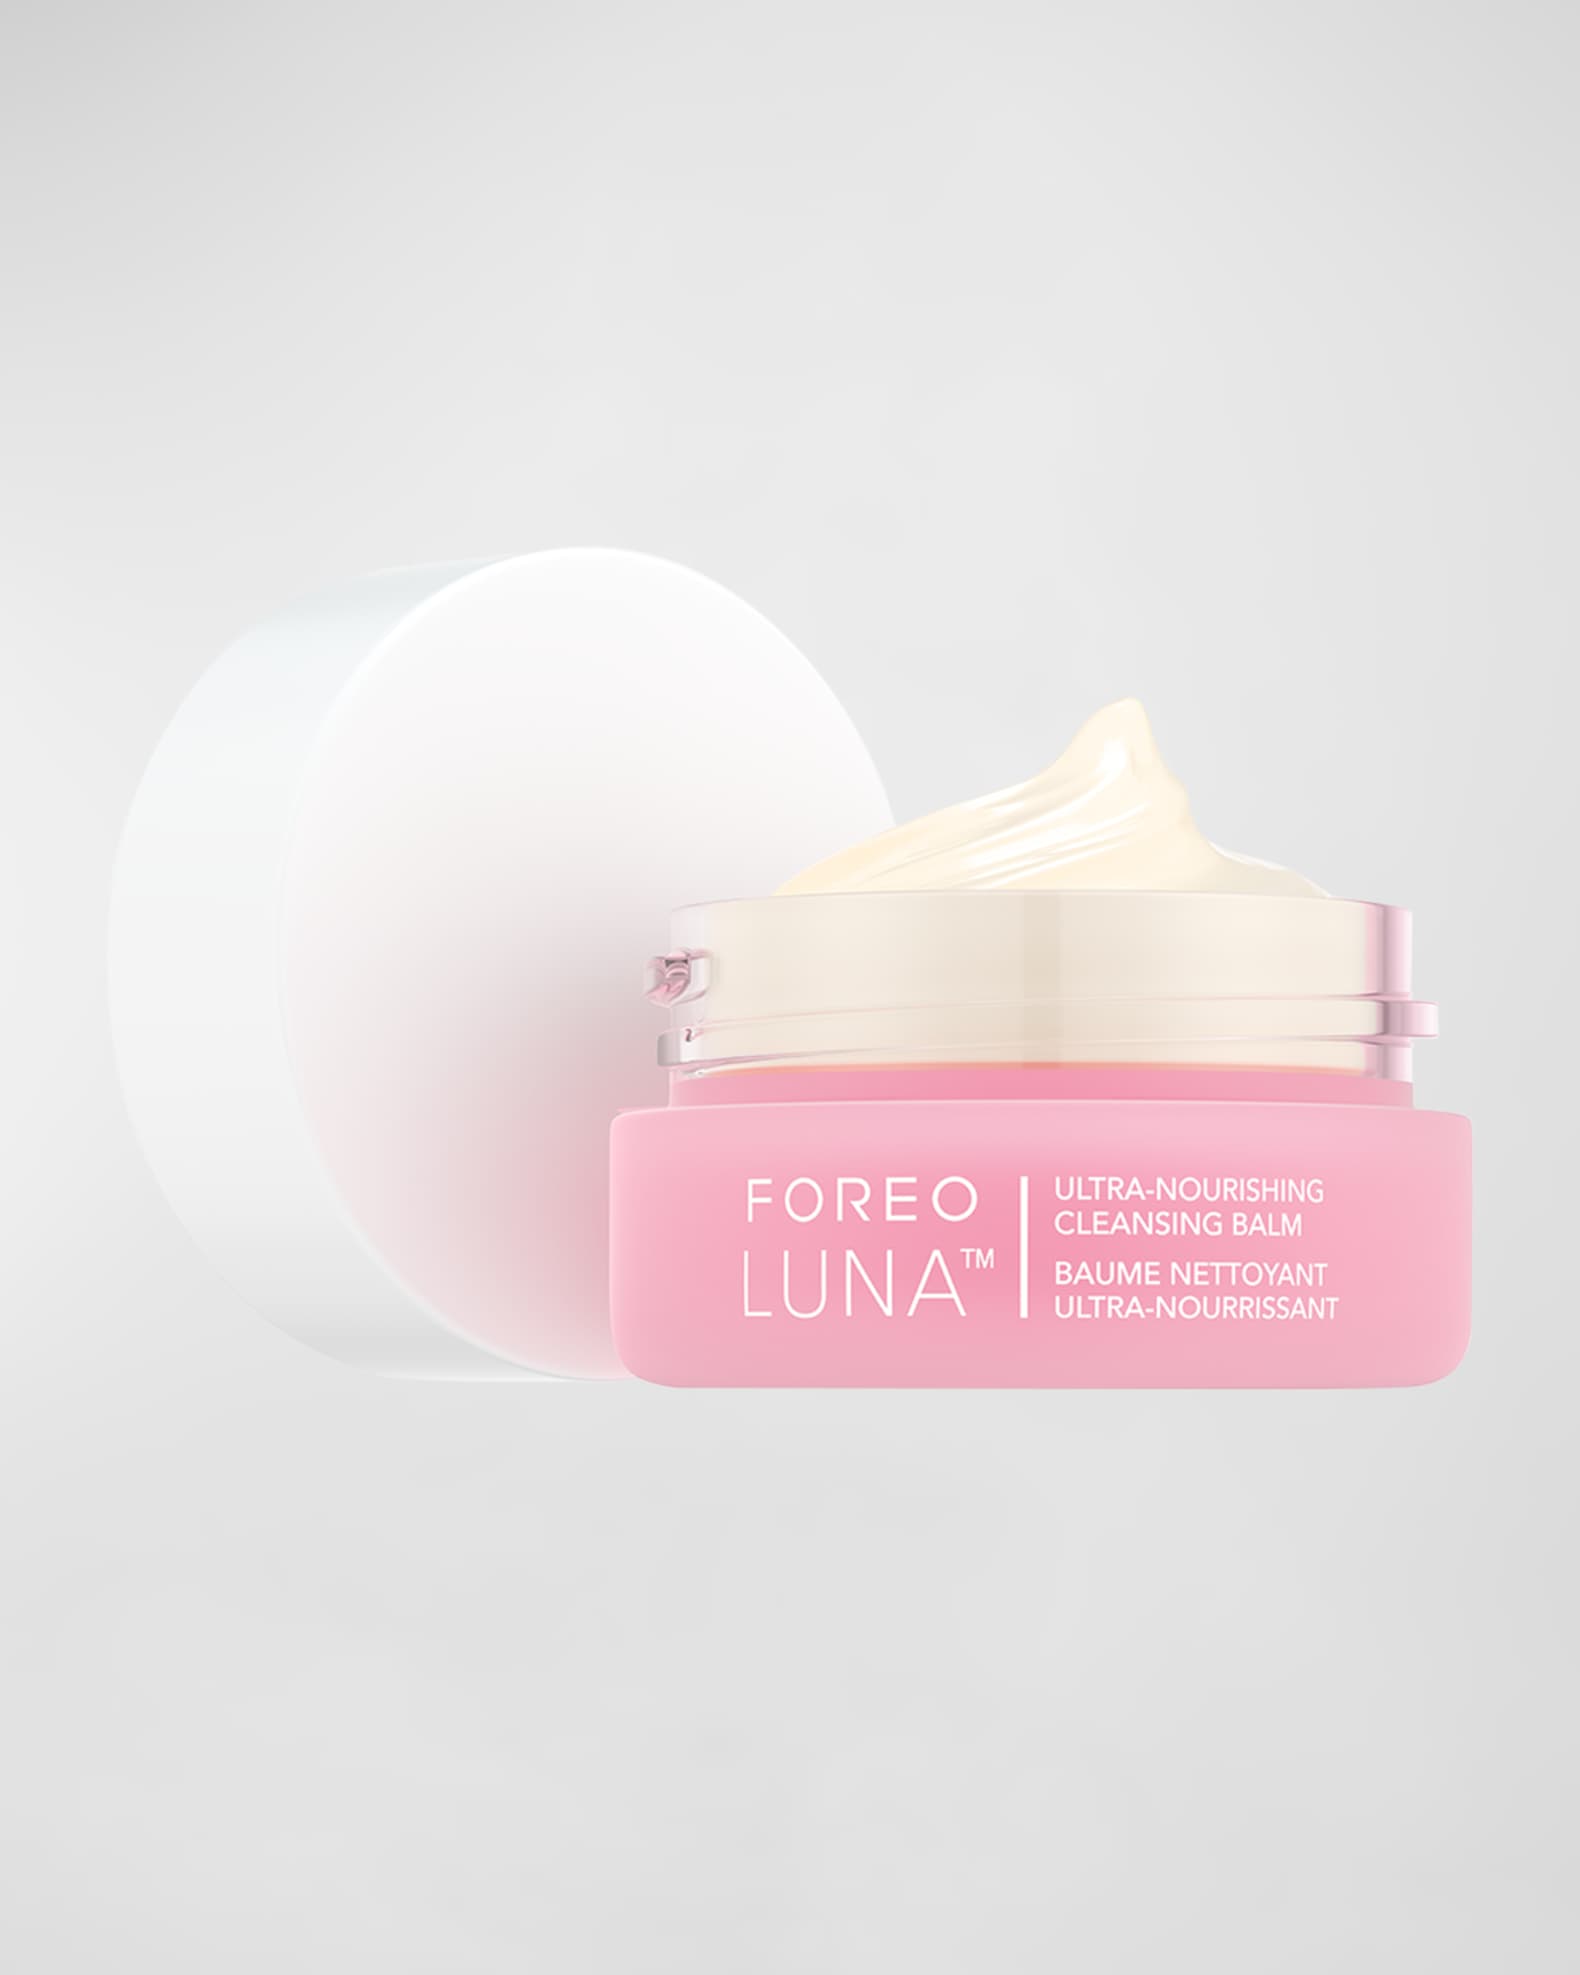 Foreo LUNA Ultra Nourishing Cleansing Balm, Yours with any $250 Foreo Order  | Neiman Marcus